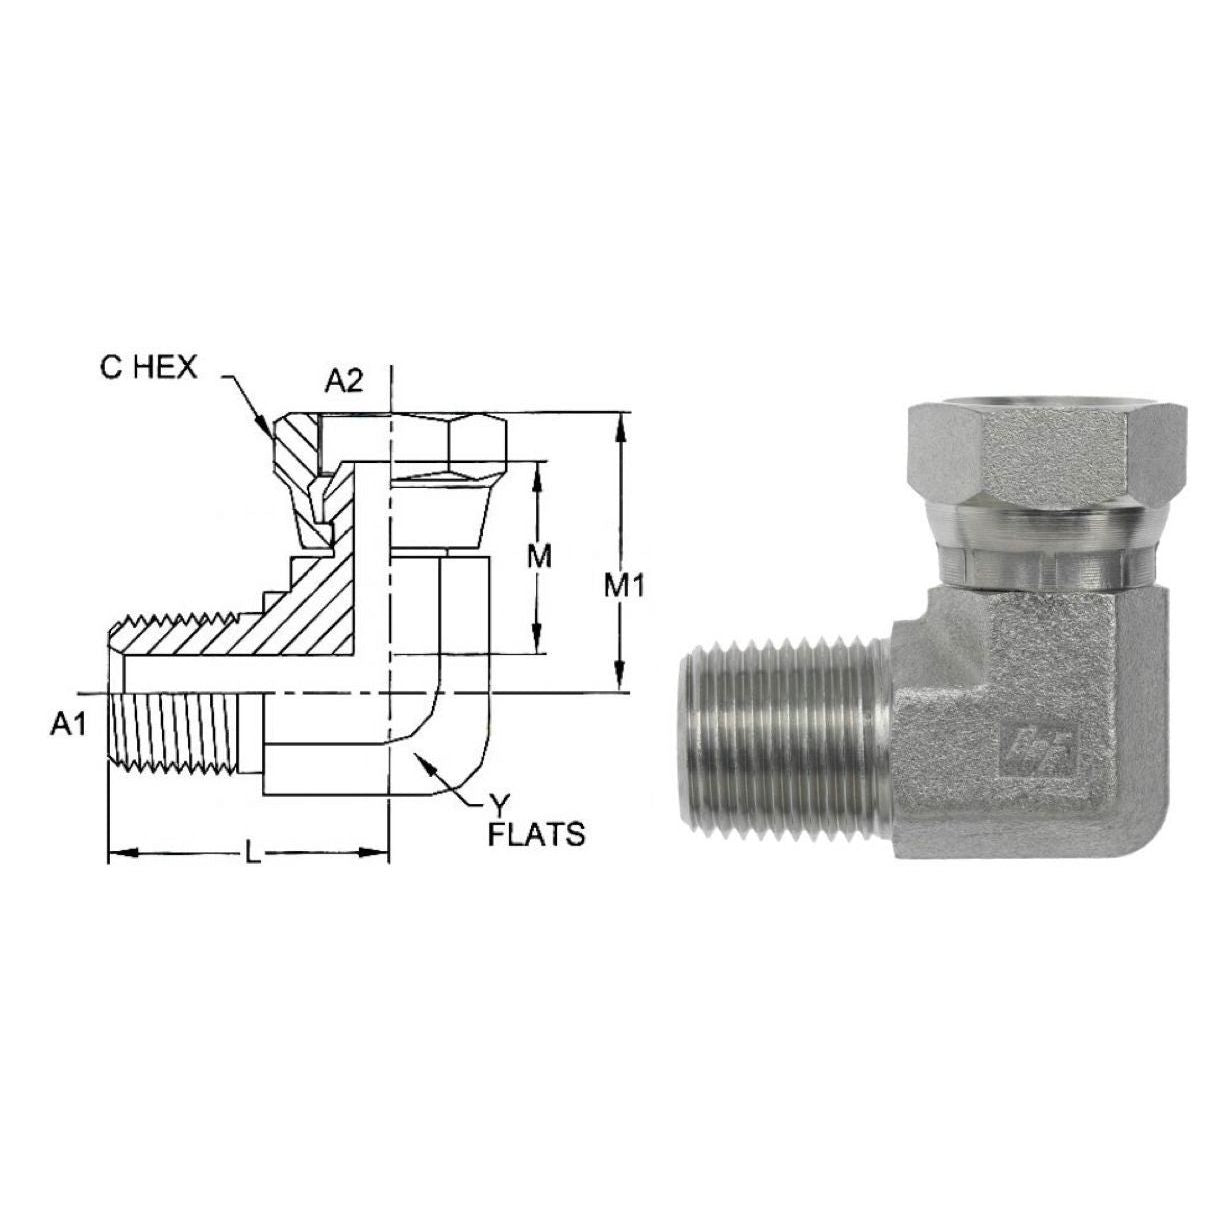 1501-24-24-SS : OneHydraulics 90-Degree Elbow, 1.5 (1-1/2) Male NPT x 1.5 (1-1/2) Female NPT Swivel, Stainless Steel, 1500psi